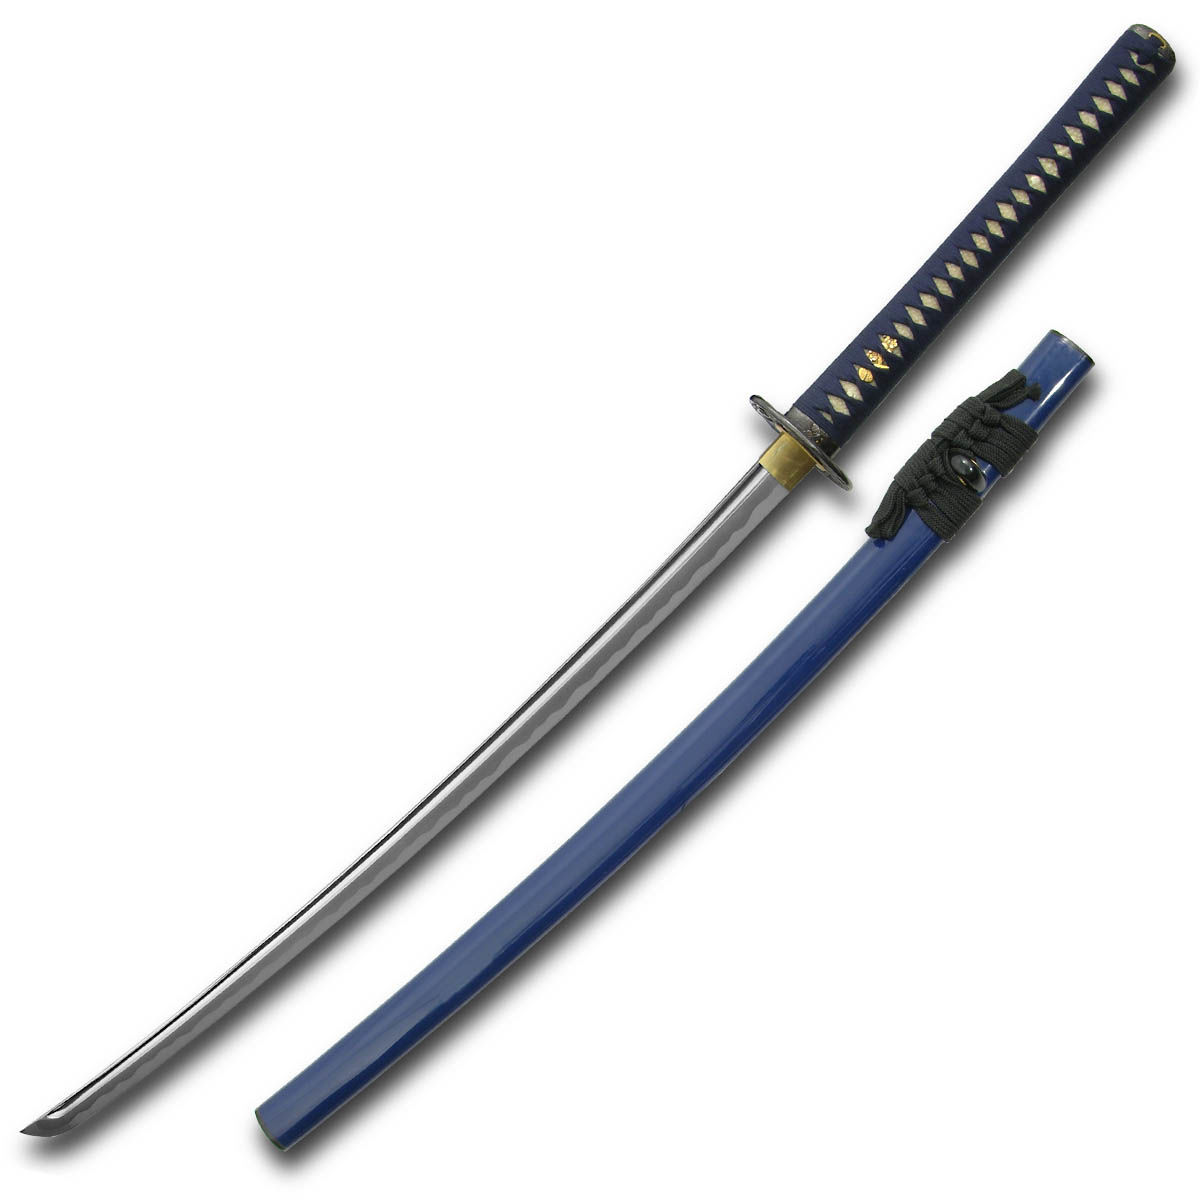 Golden Oriole Katana with deeply lacquered blue saya